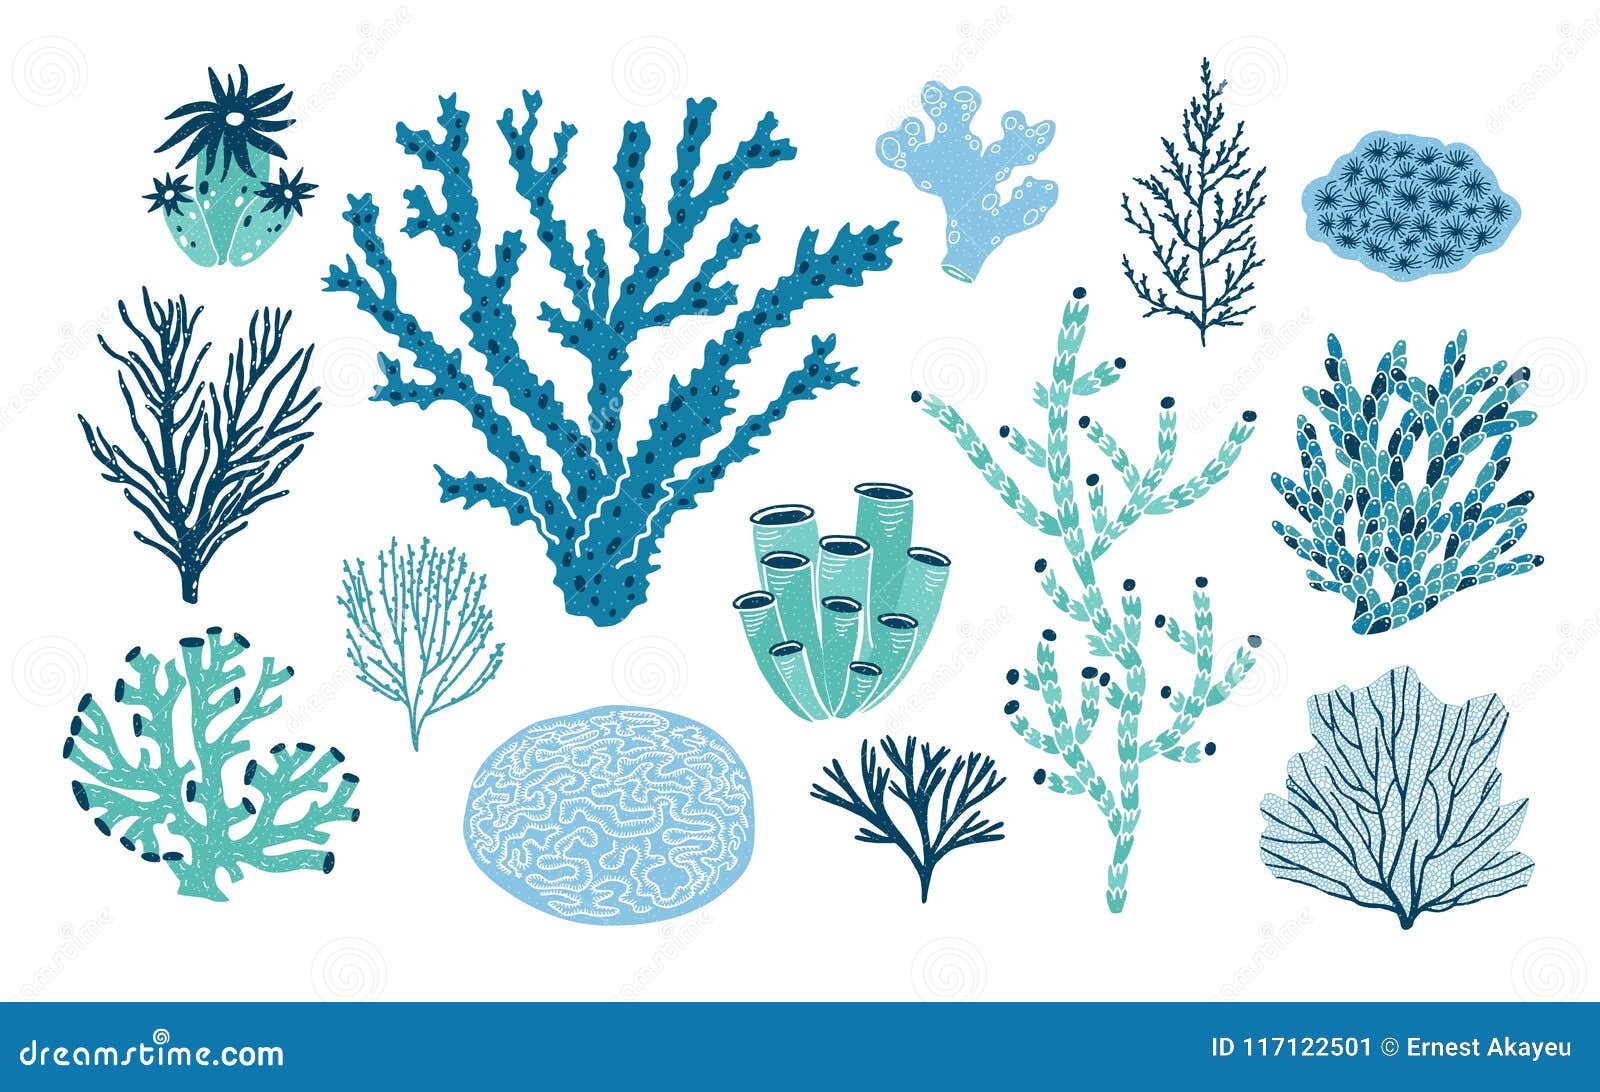 bundle of various corals and seaweed or algae  on white background. set of blue and green underwater species